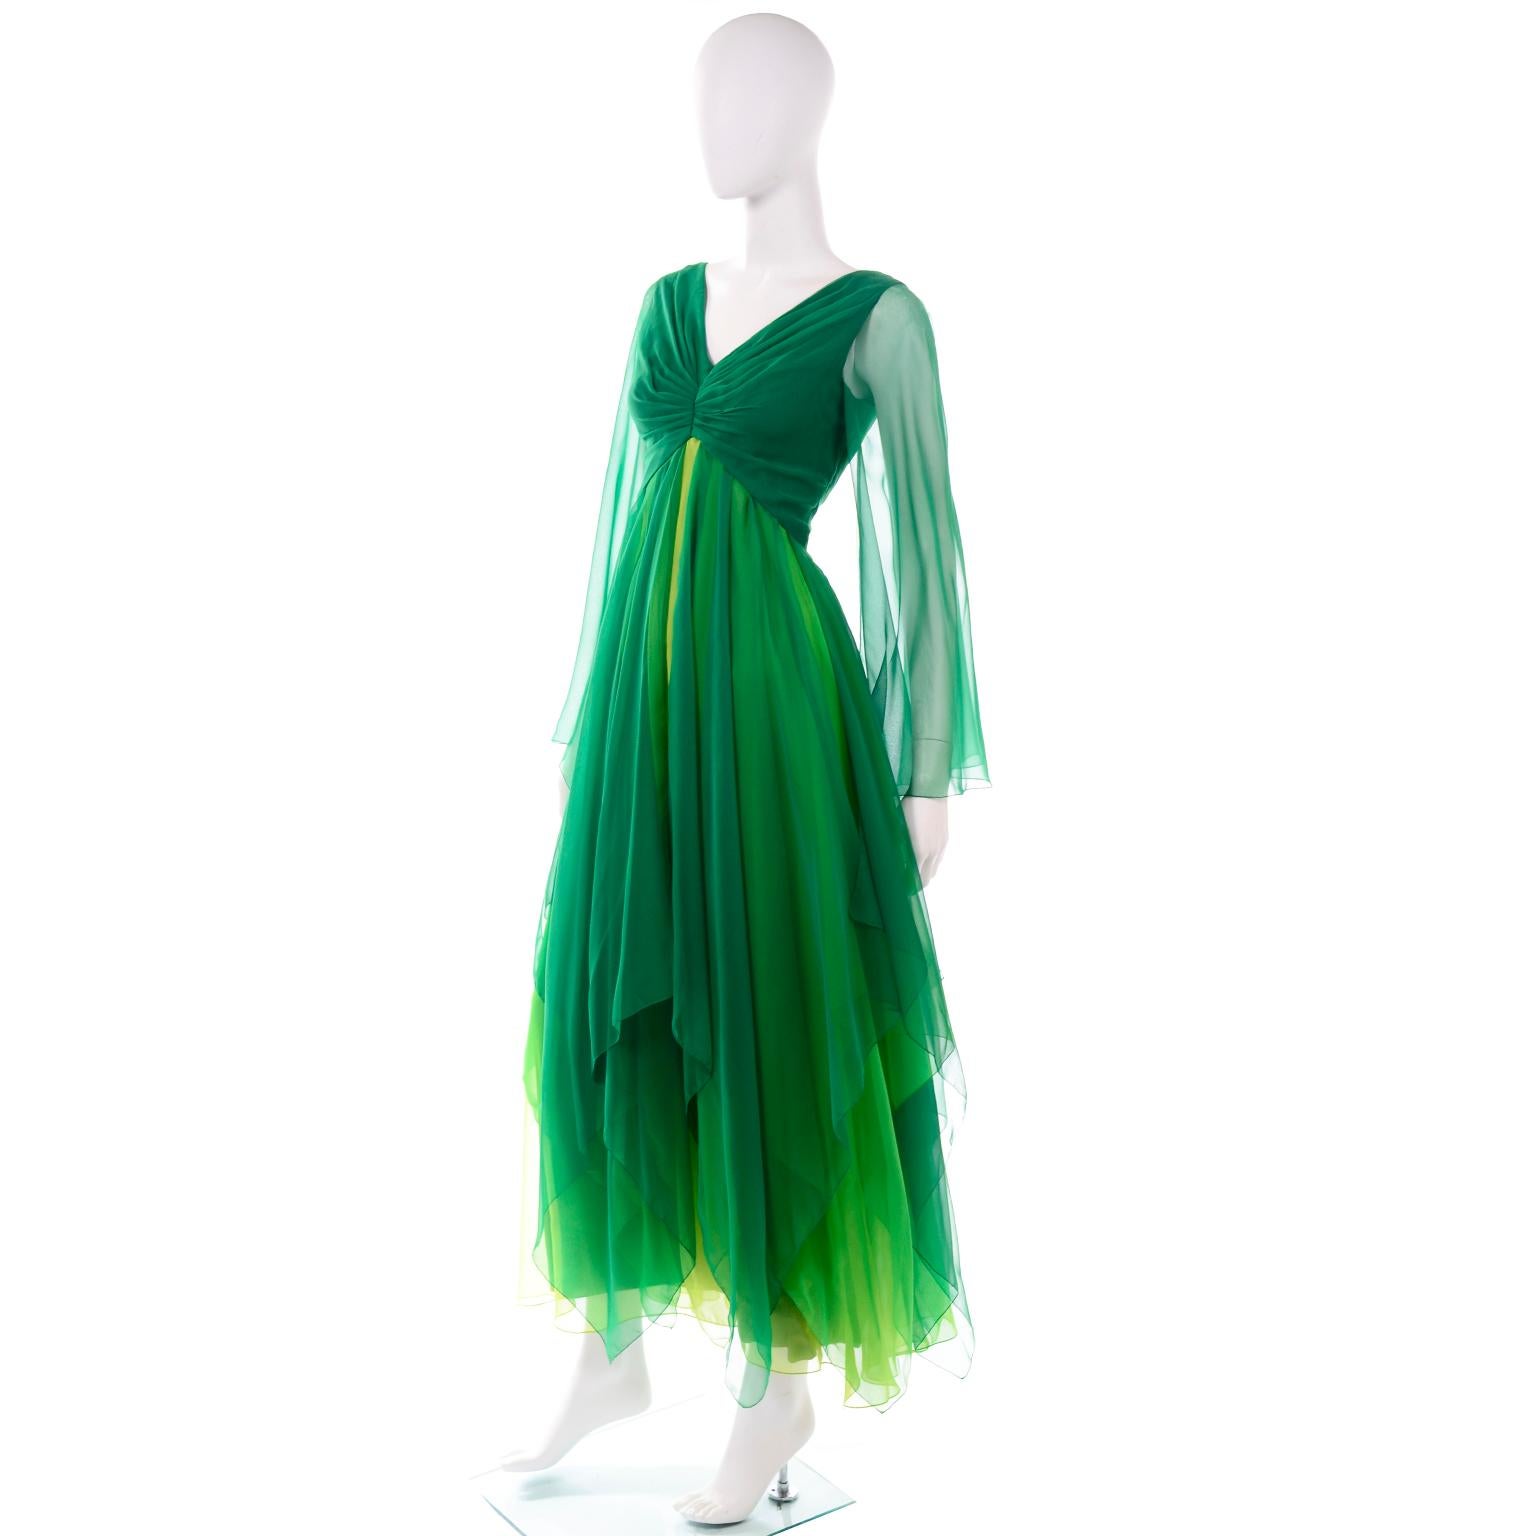 Women's Vintage Layered Flowing Evening Dress in Multi Shades of Green Silk Chiffon  For Sale